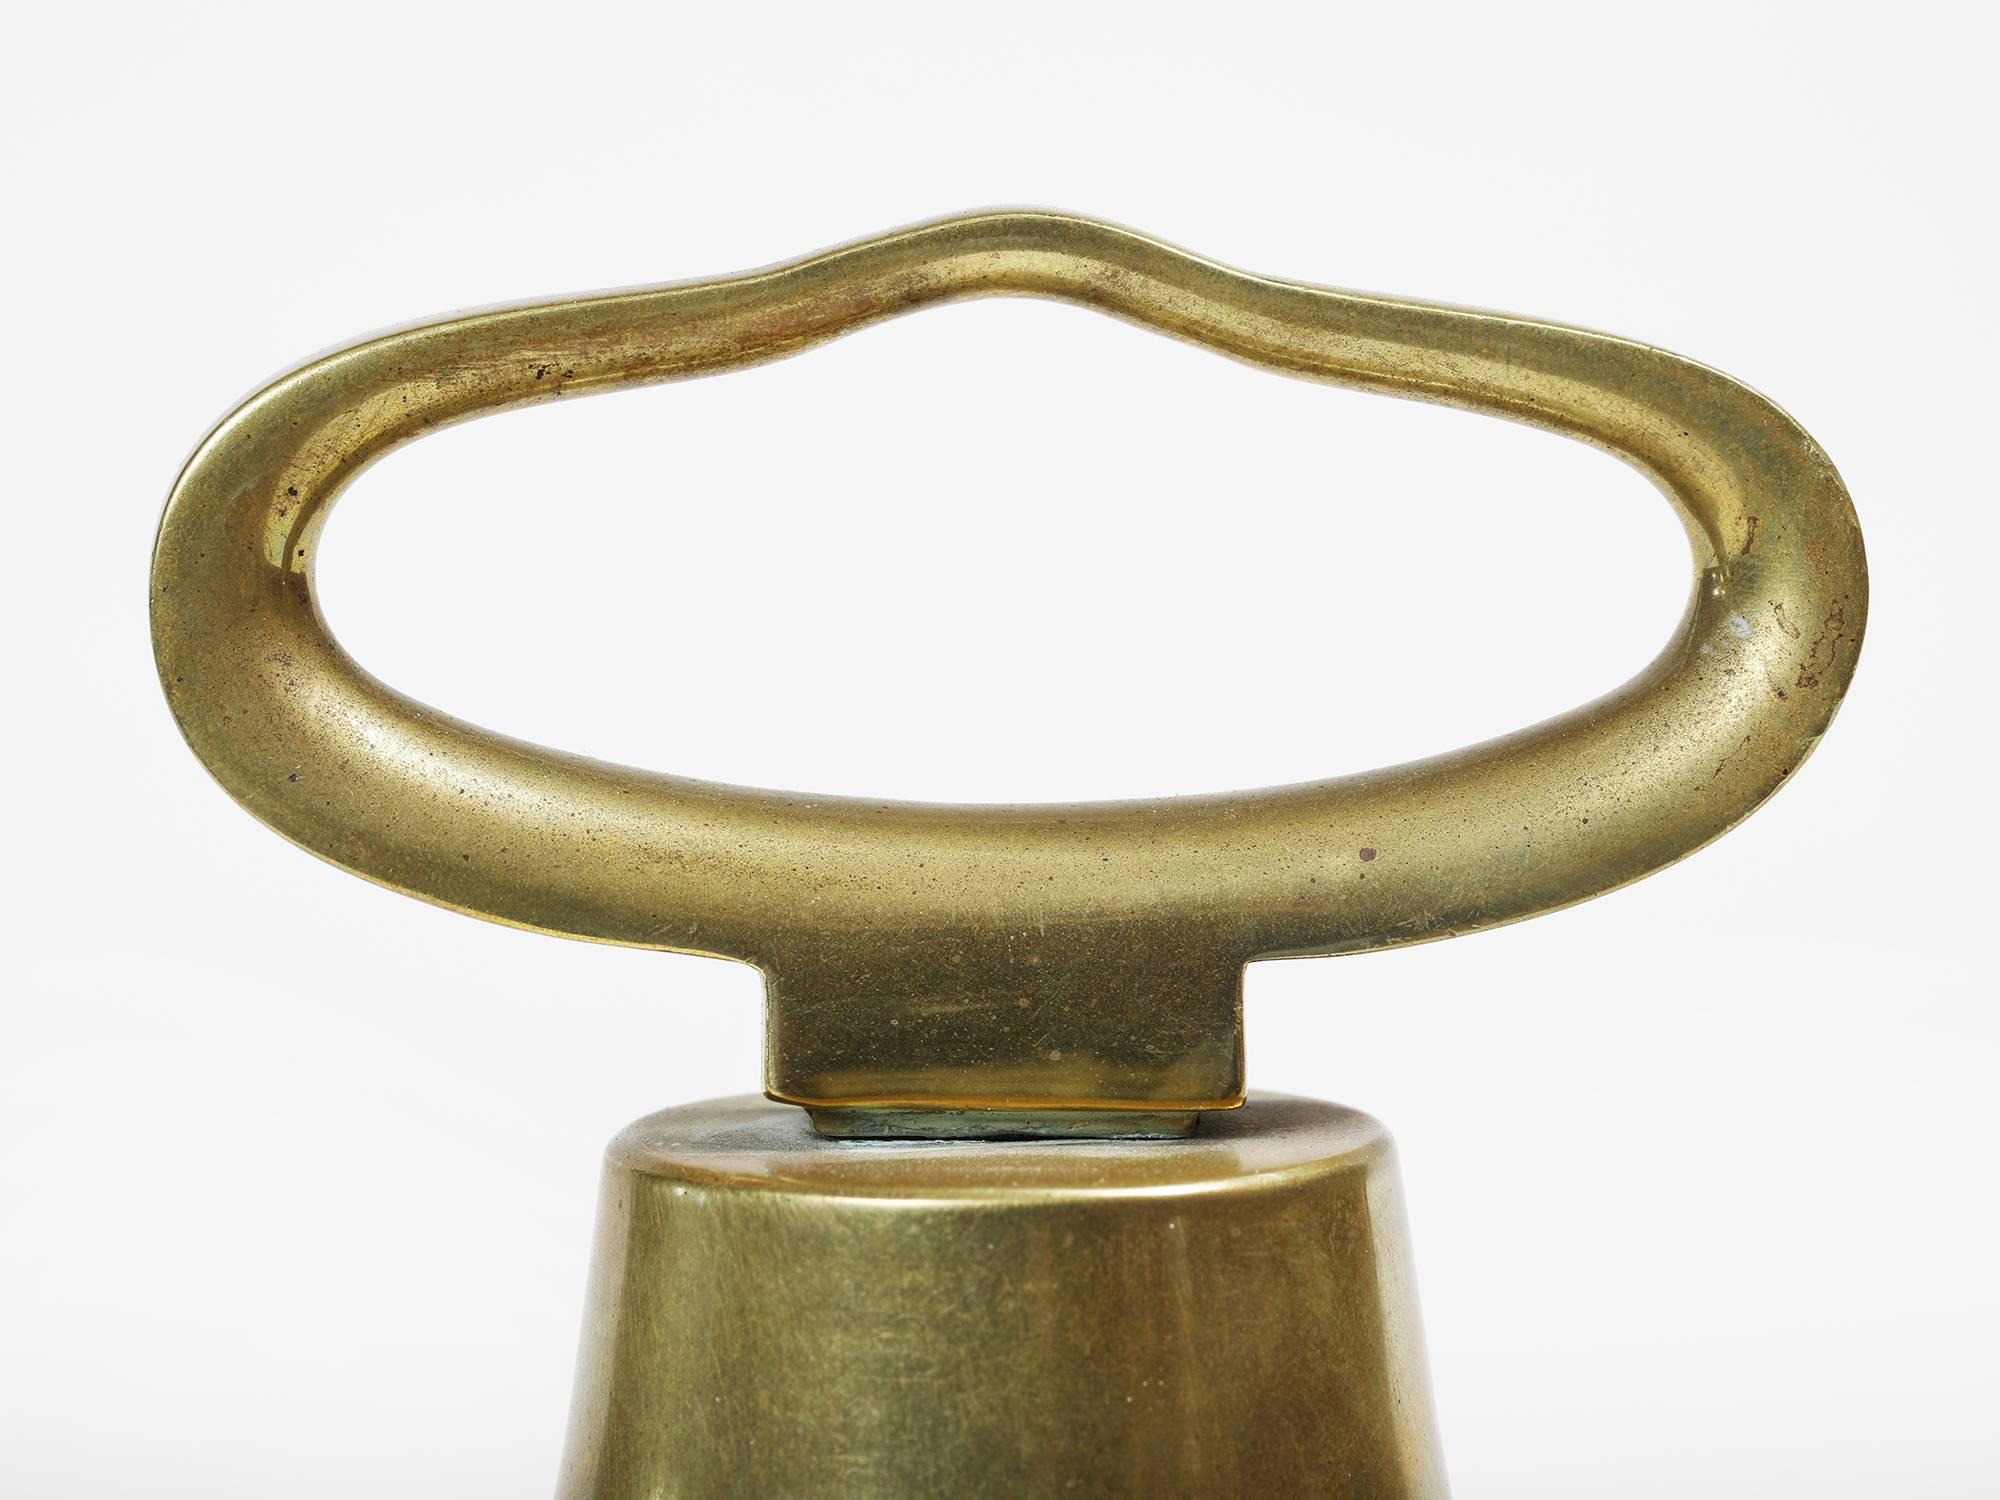 Large, solid brass dinner bell or paperweight by Viennese master designer Carl Auböck, made in Austria in 1944.